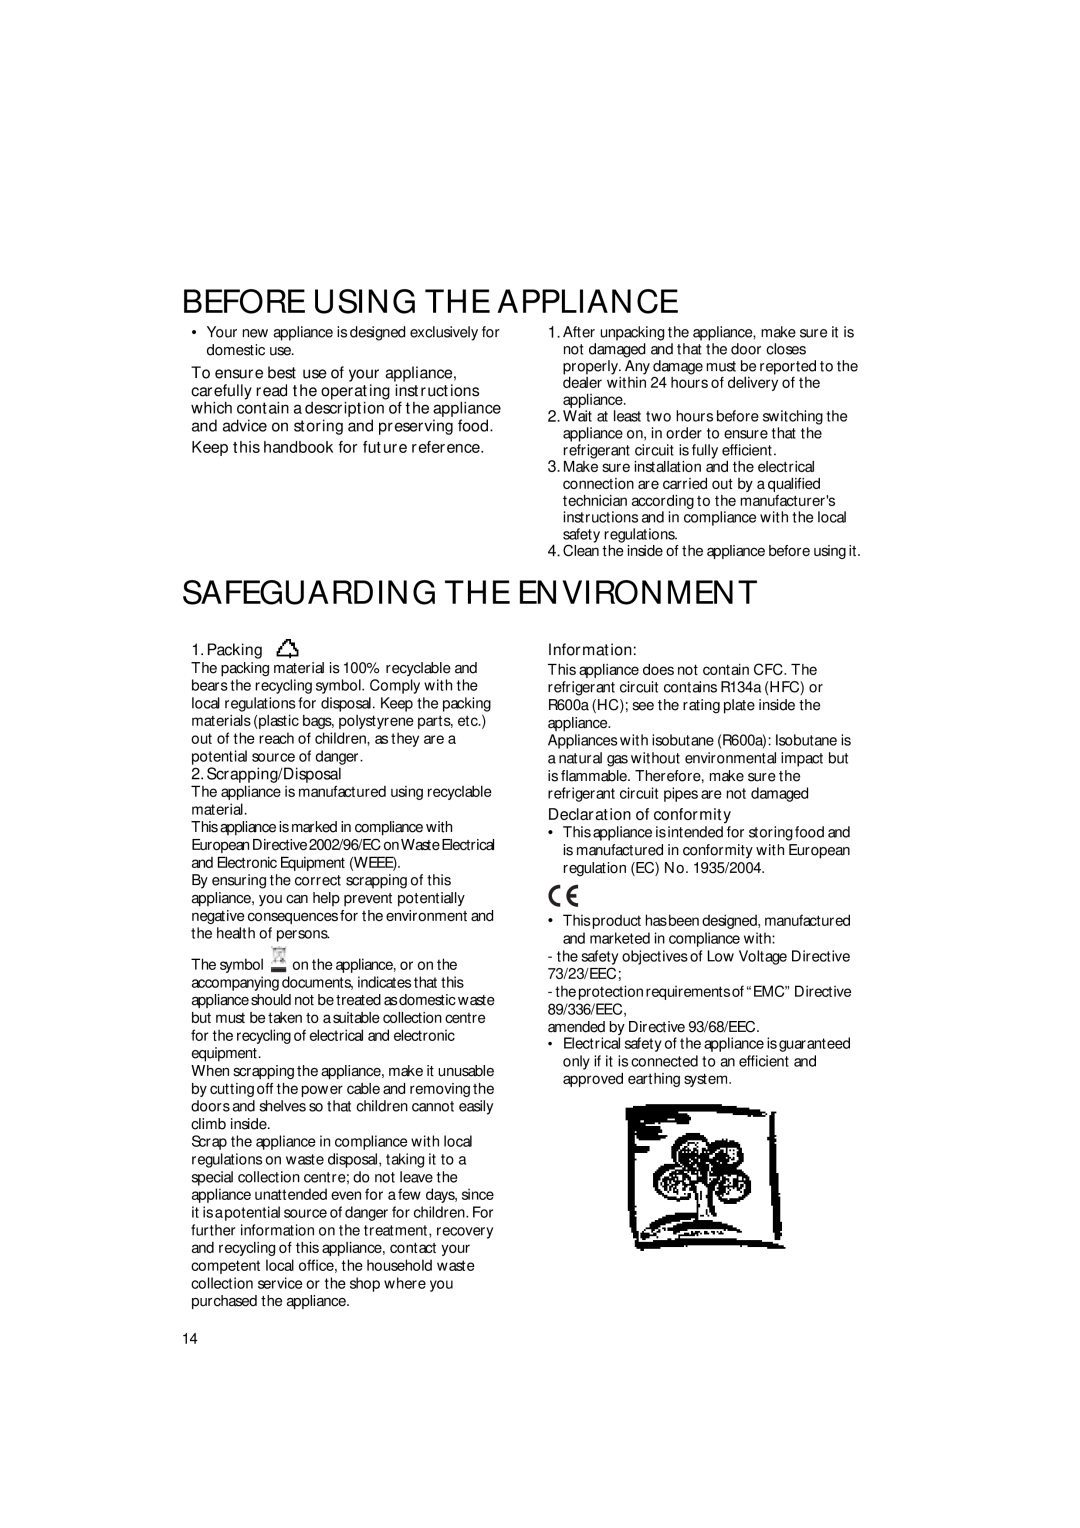 Smeg FR310APL Before Using The Appliance, Safeguarding The Environment, Keep this handbook for future reference, Packing 